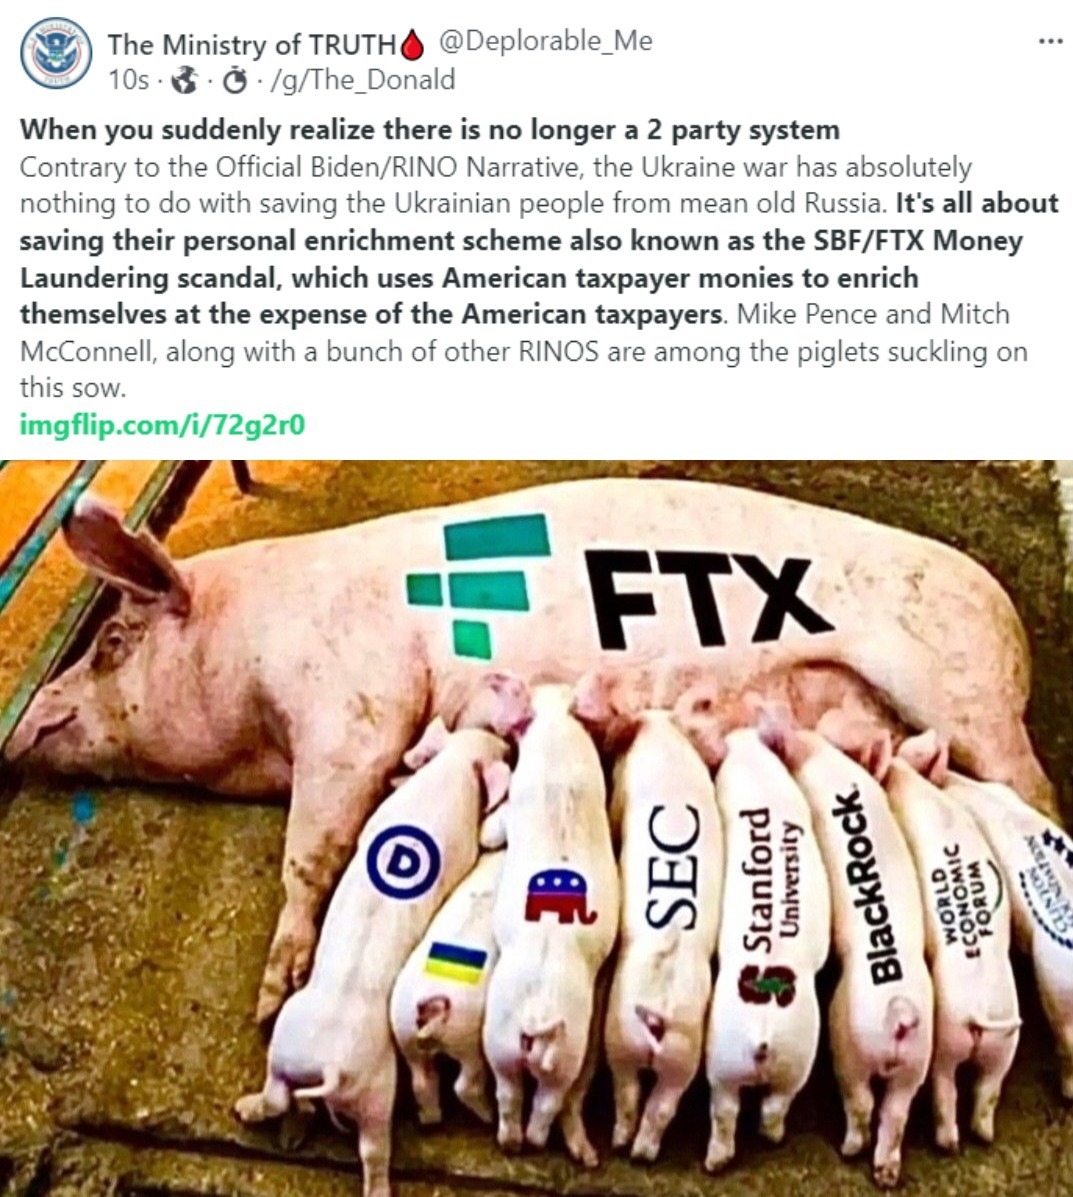 Uniparty Piglets Suckling on This Cash Sow | image tagged in sbf,ftx,money laundering,government corruption,taxpayers,ukraine | made w/ Imgflip meme maker